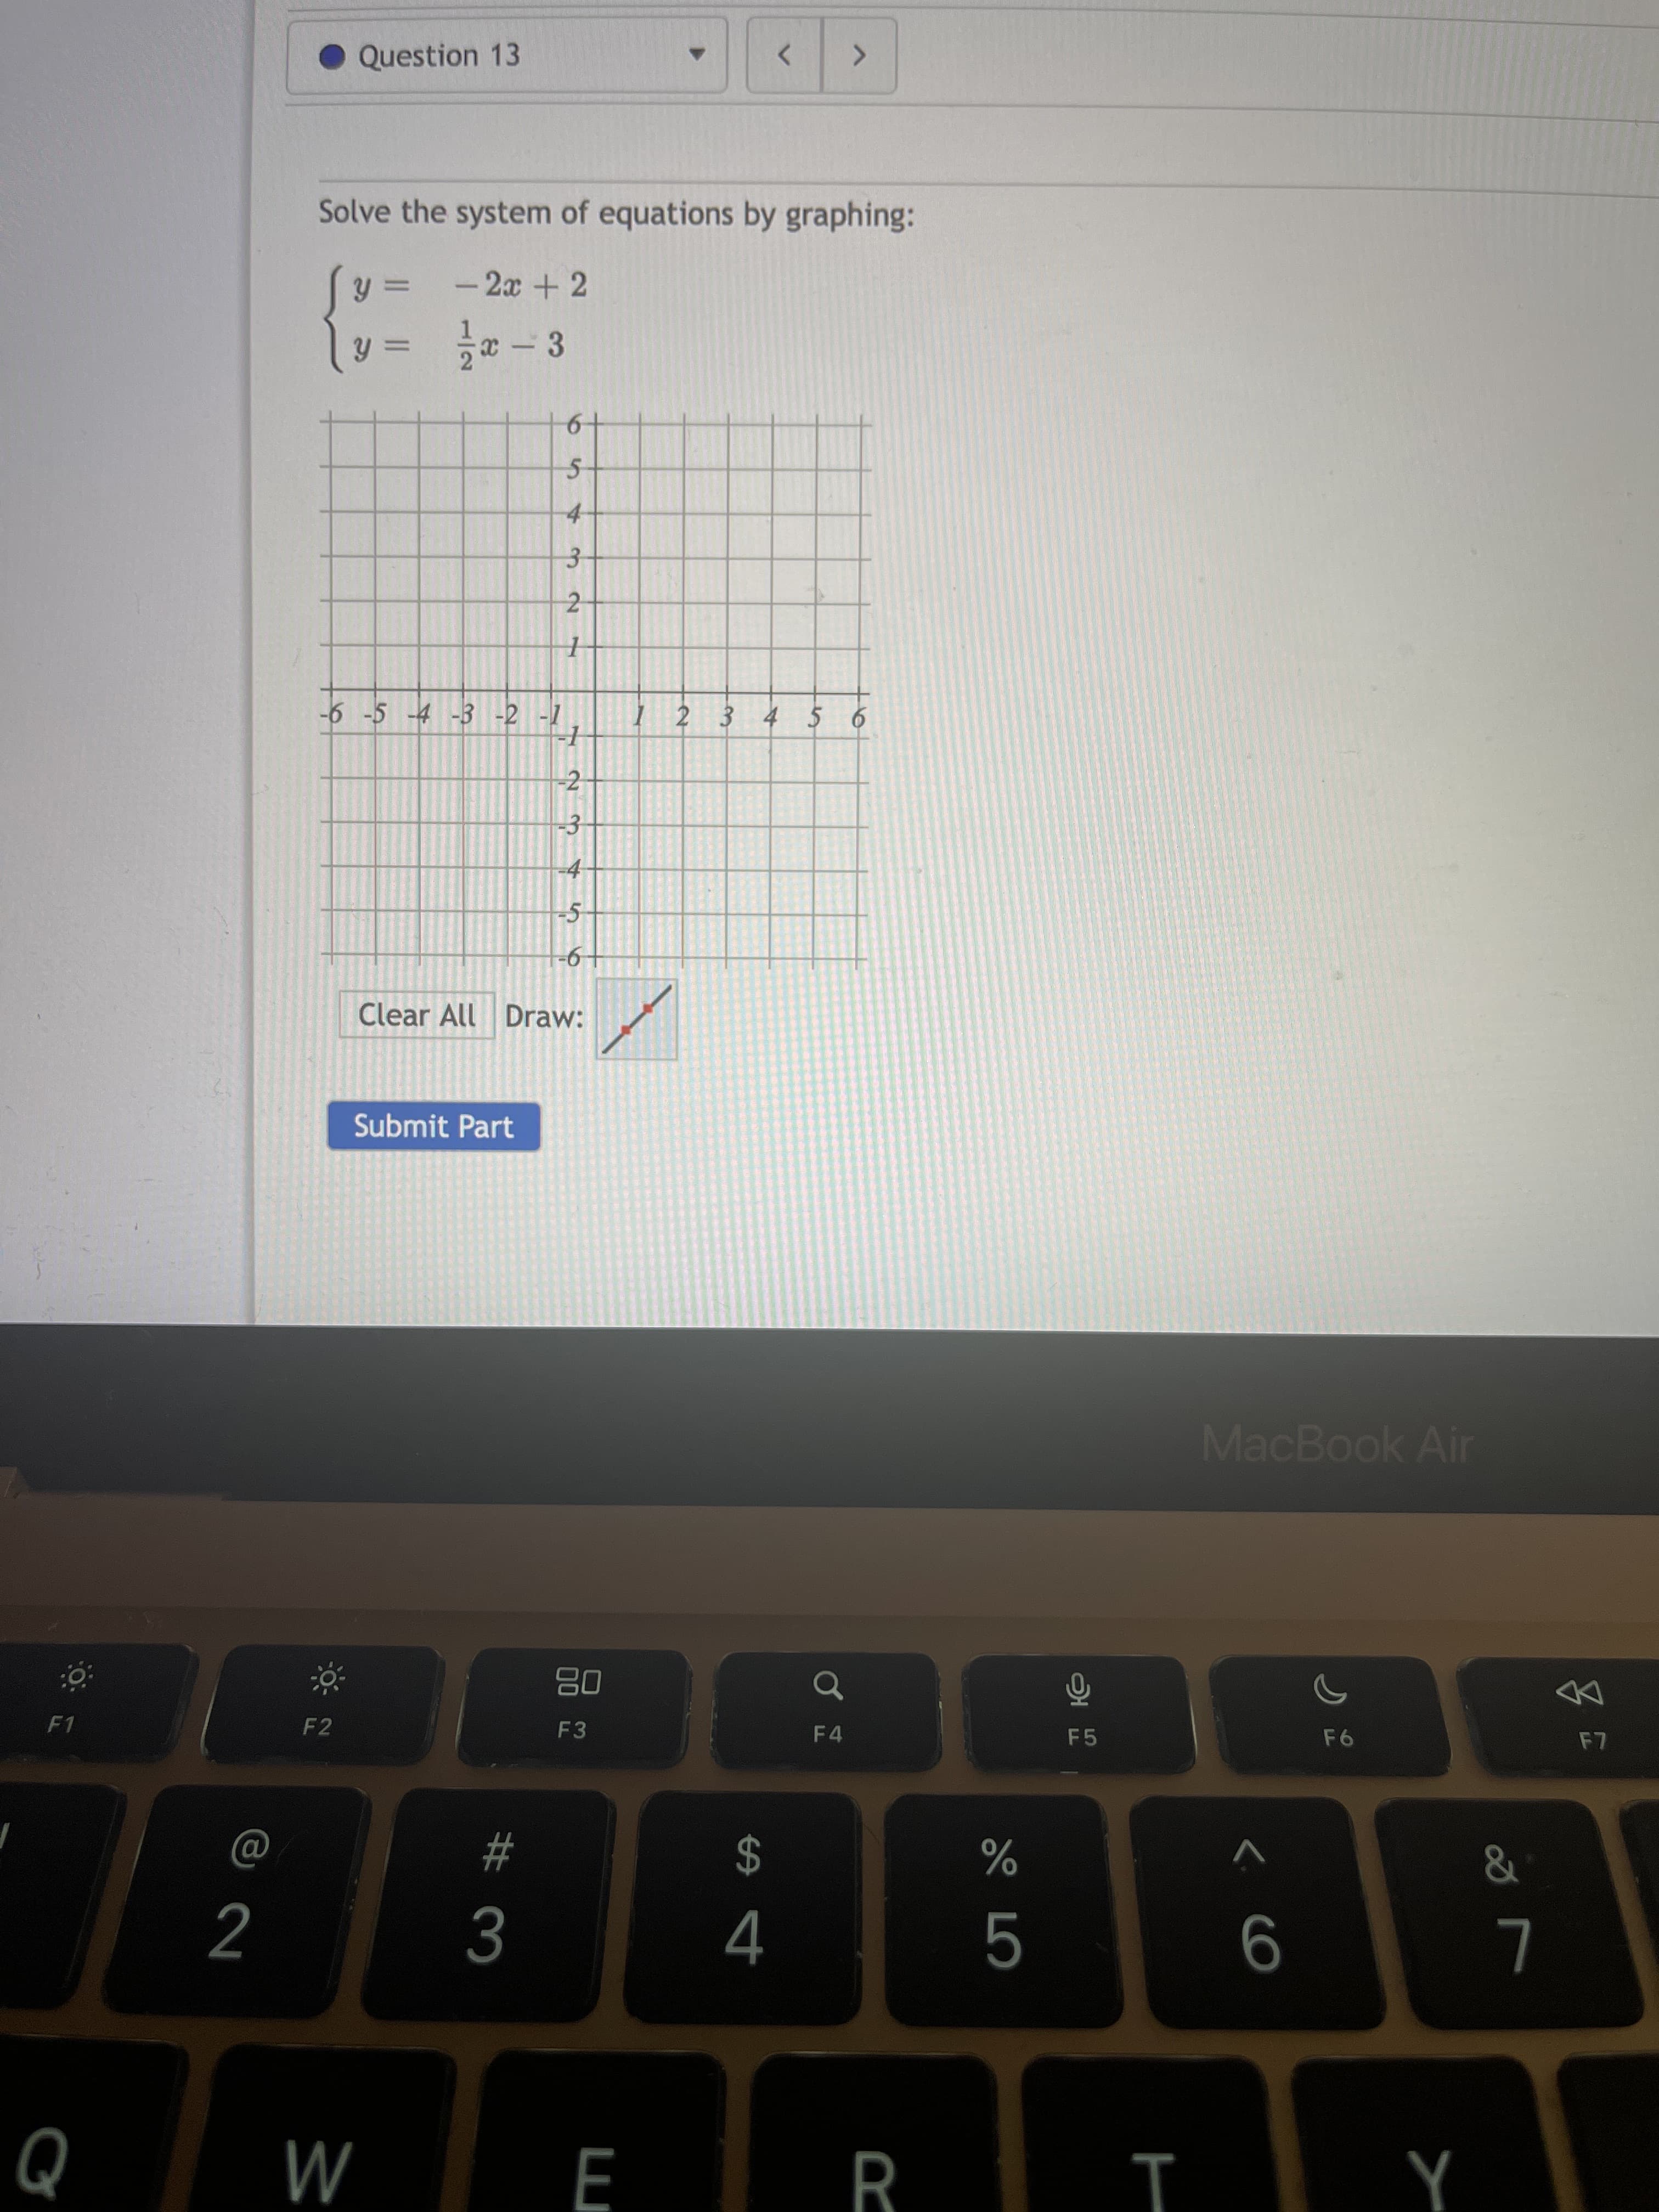 6
3.
2.
# 3
1/2
Question 13
Solve the system of equations by graphing:
- 2x + 2
c- 3
%3D
-6 -5 -4 -3 -2 -1
2 3 4 5 6
-2
-3
-4
Clear All Draw:
Submit Part
MacBook Air
08
F3
F1
DD
F2
F4
F5
2$
4
%23
&
%
L
M
